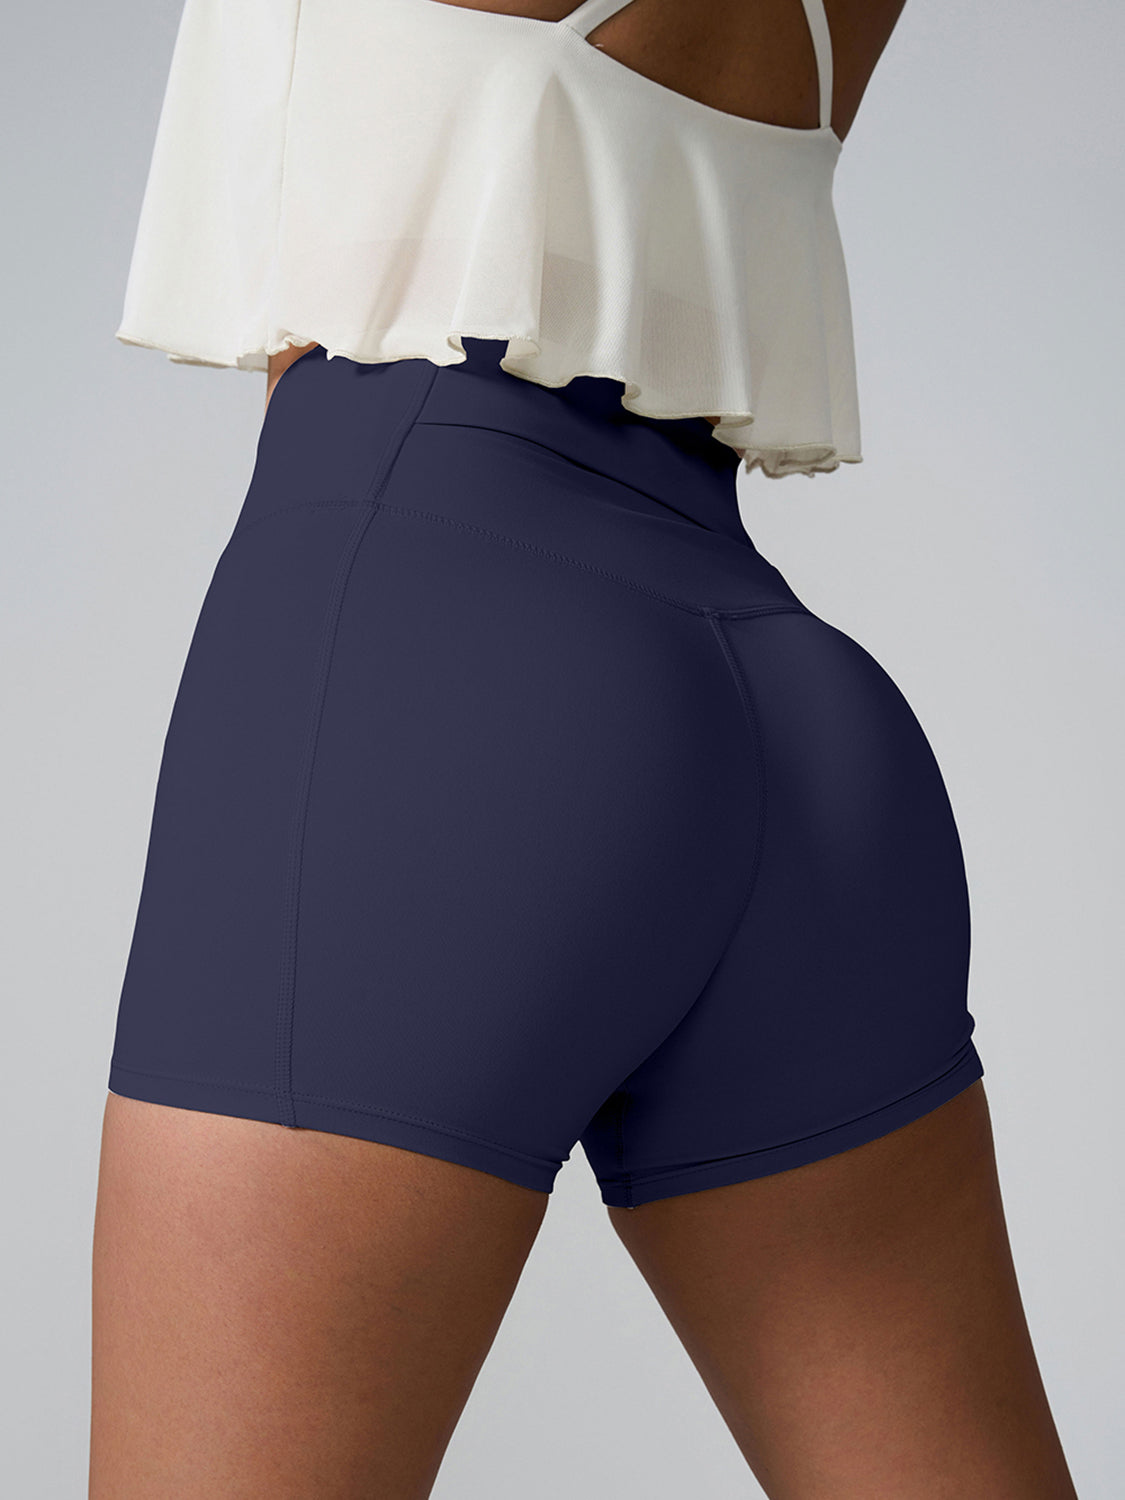 High Waist Active Shorts free shipping -Oh Em Gee Boutique